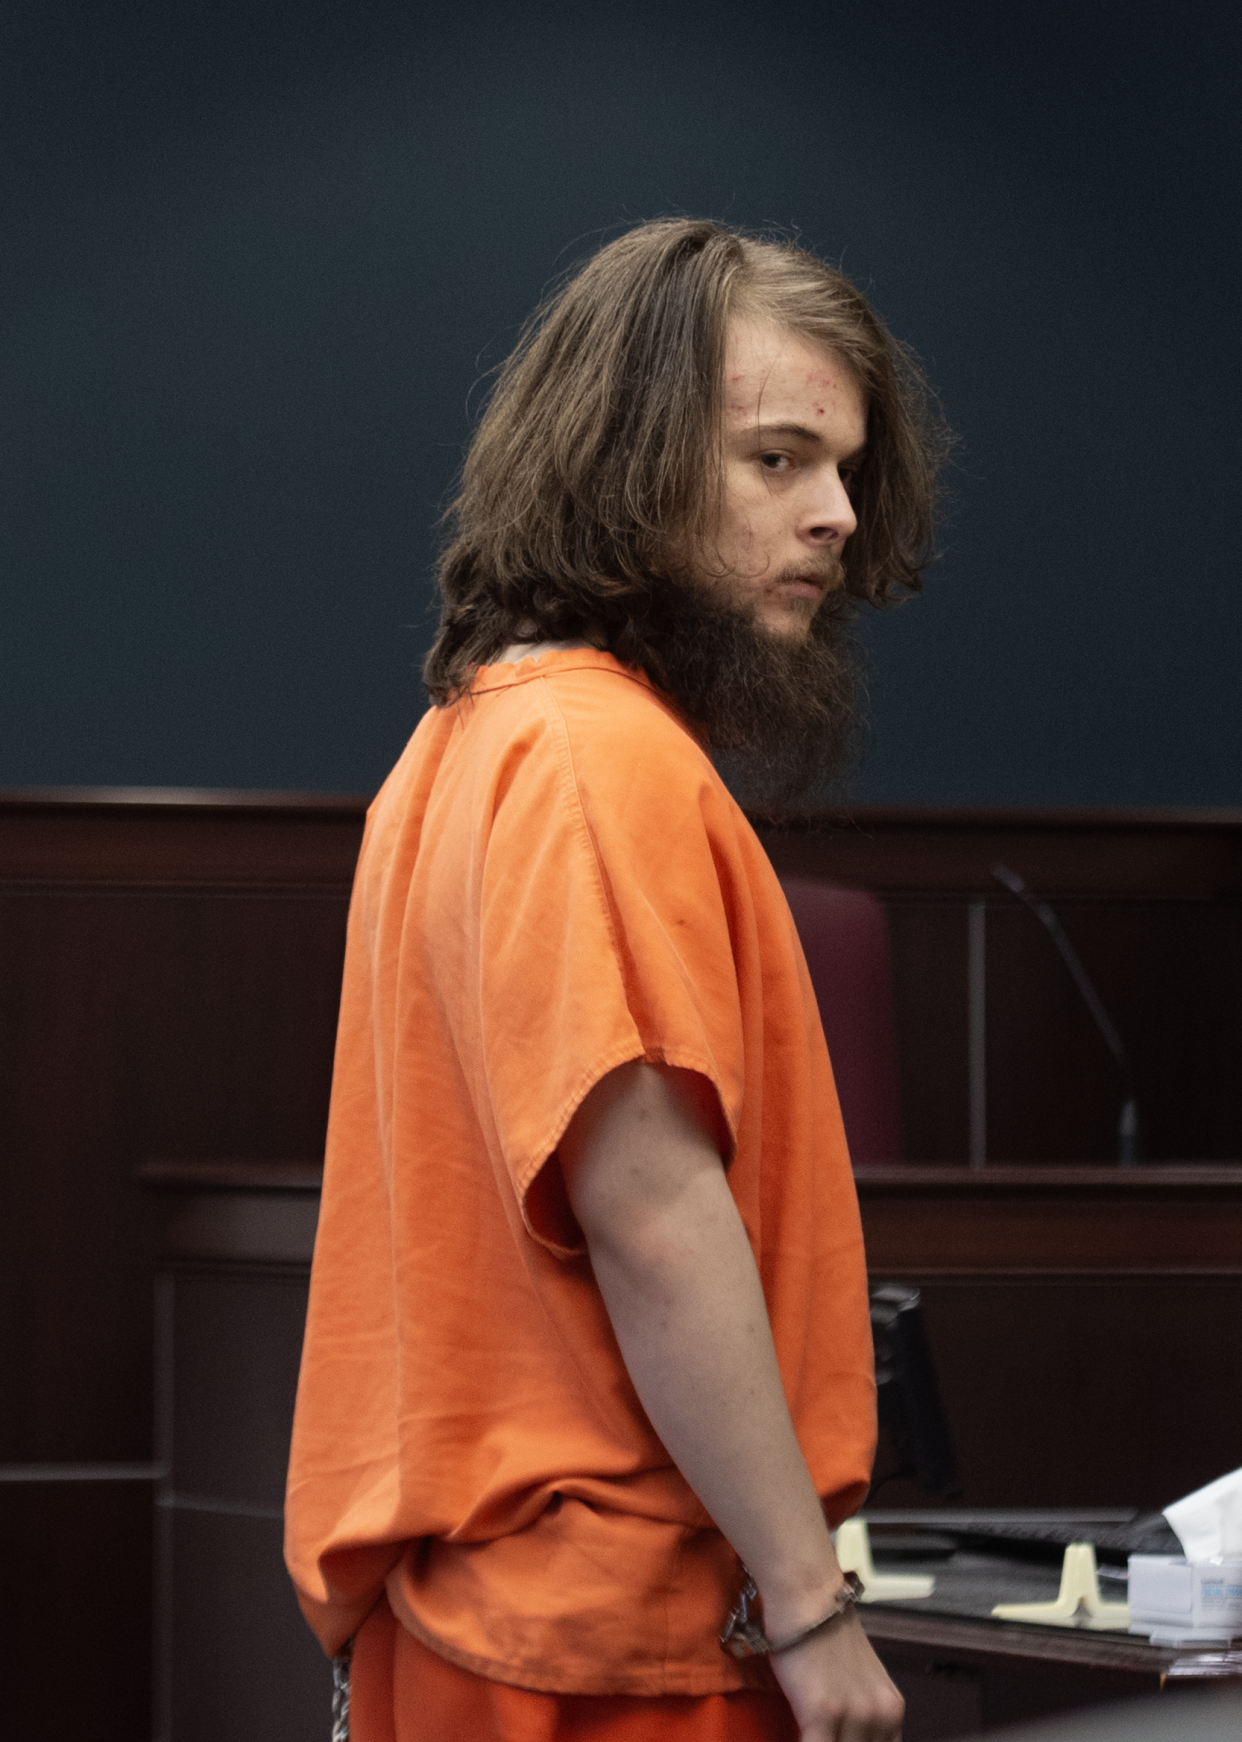 Nathan A. McAtee, who is accused of killing his 11-year-old brother Joseph with a sword, was determined Monday in Portage County Common Pleas Court to have been sane at the time of the killing.